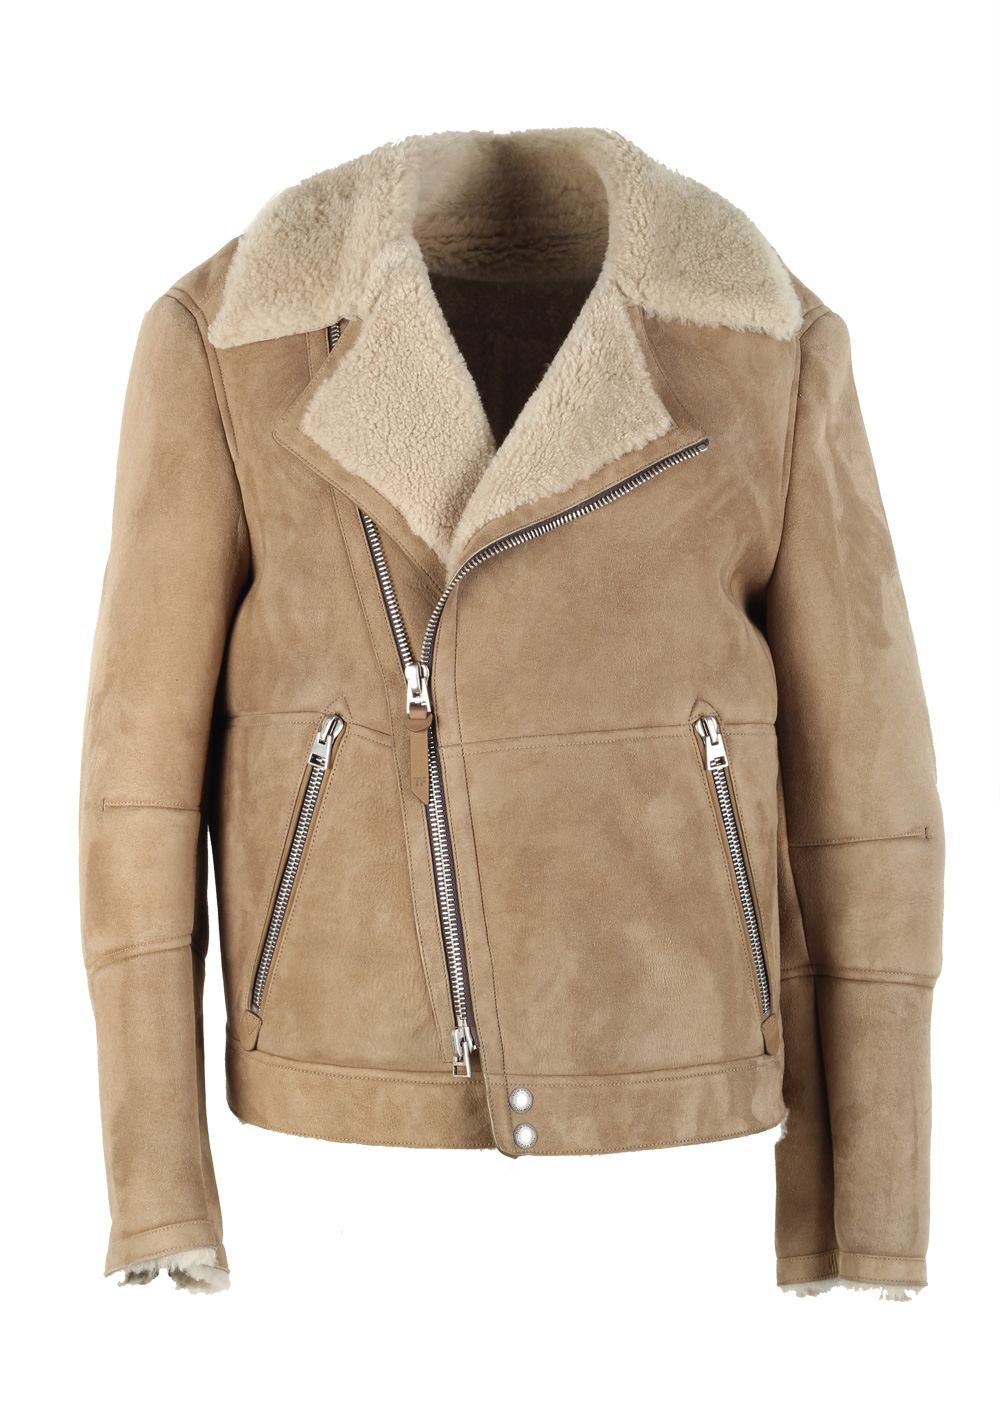 TOM FORD Sand Leather Suede Shearling Jacket Coat Size 48 / 38R U.S. Outerwear | Costume Limité